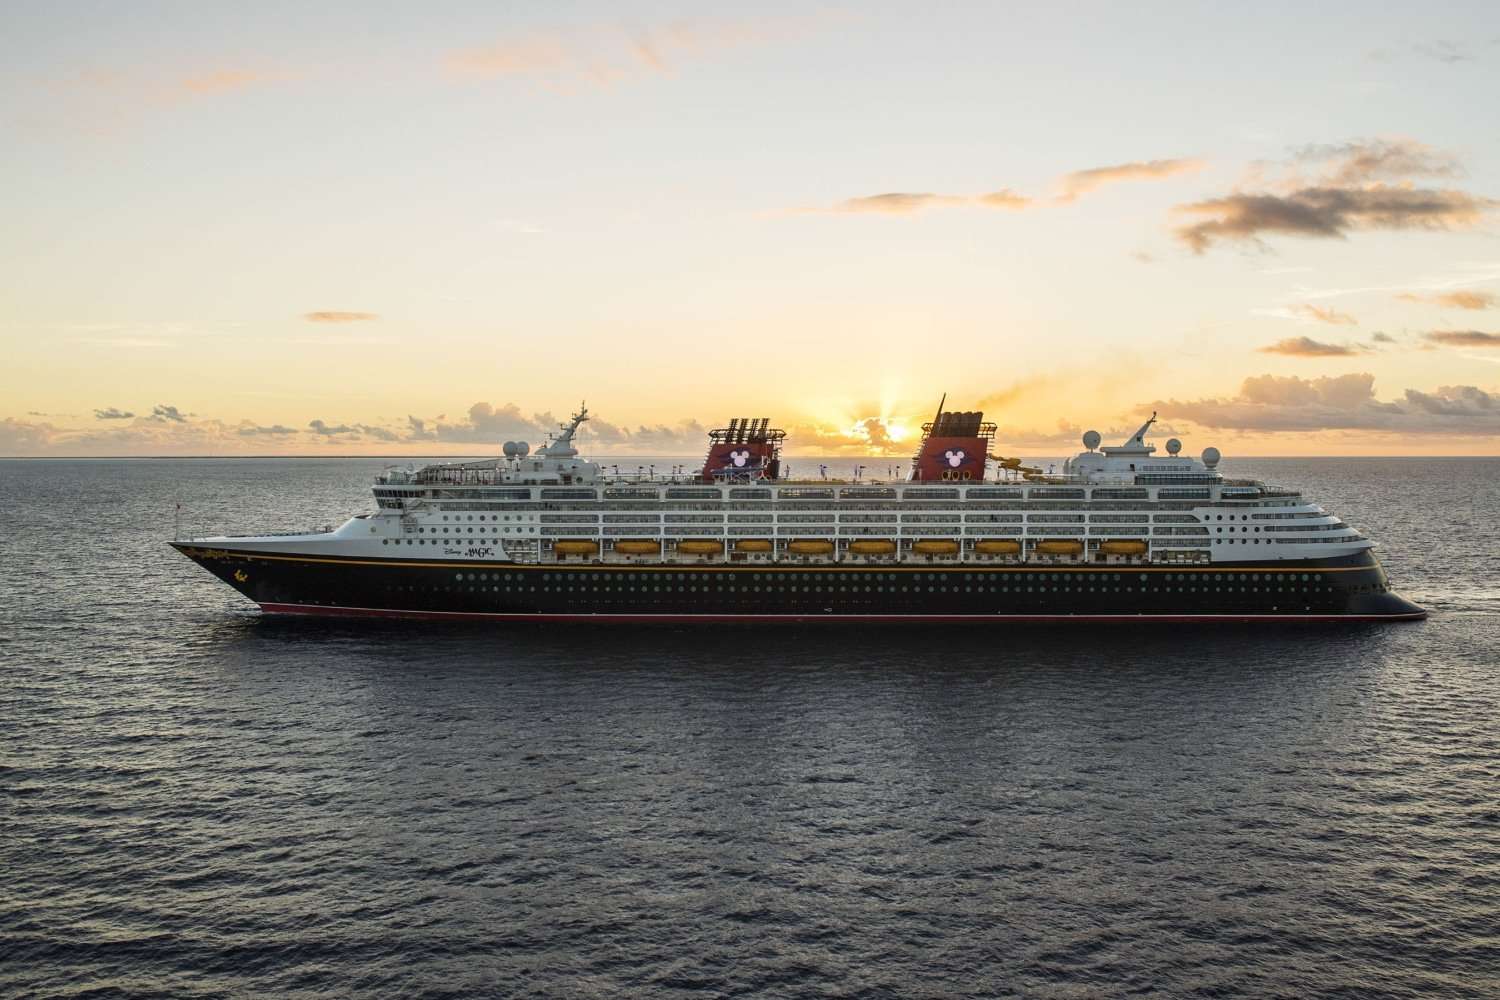 The Ultimate Family Ship: Disney Cruise Line